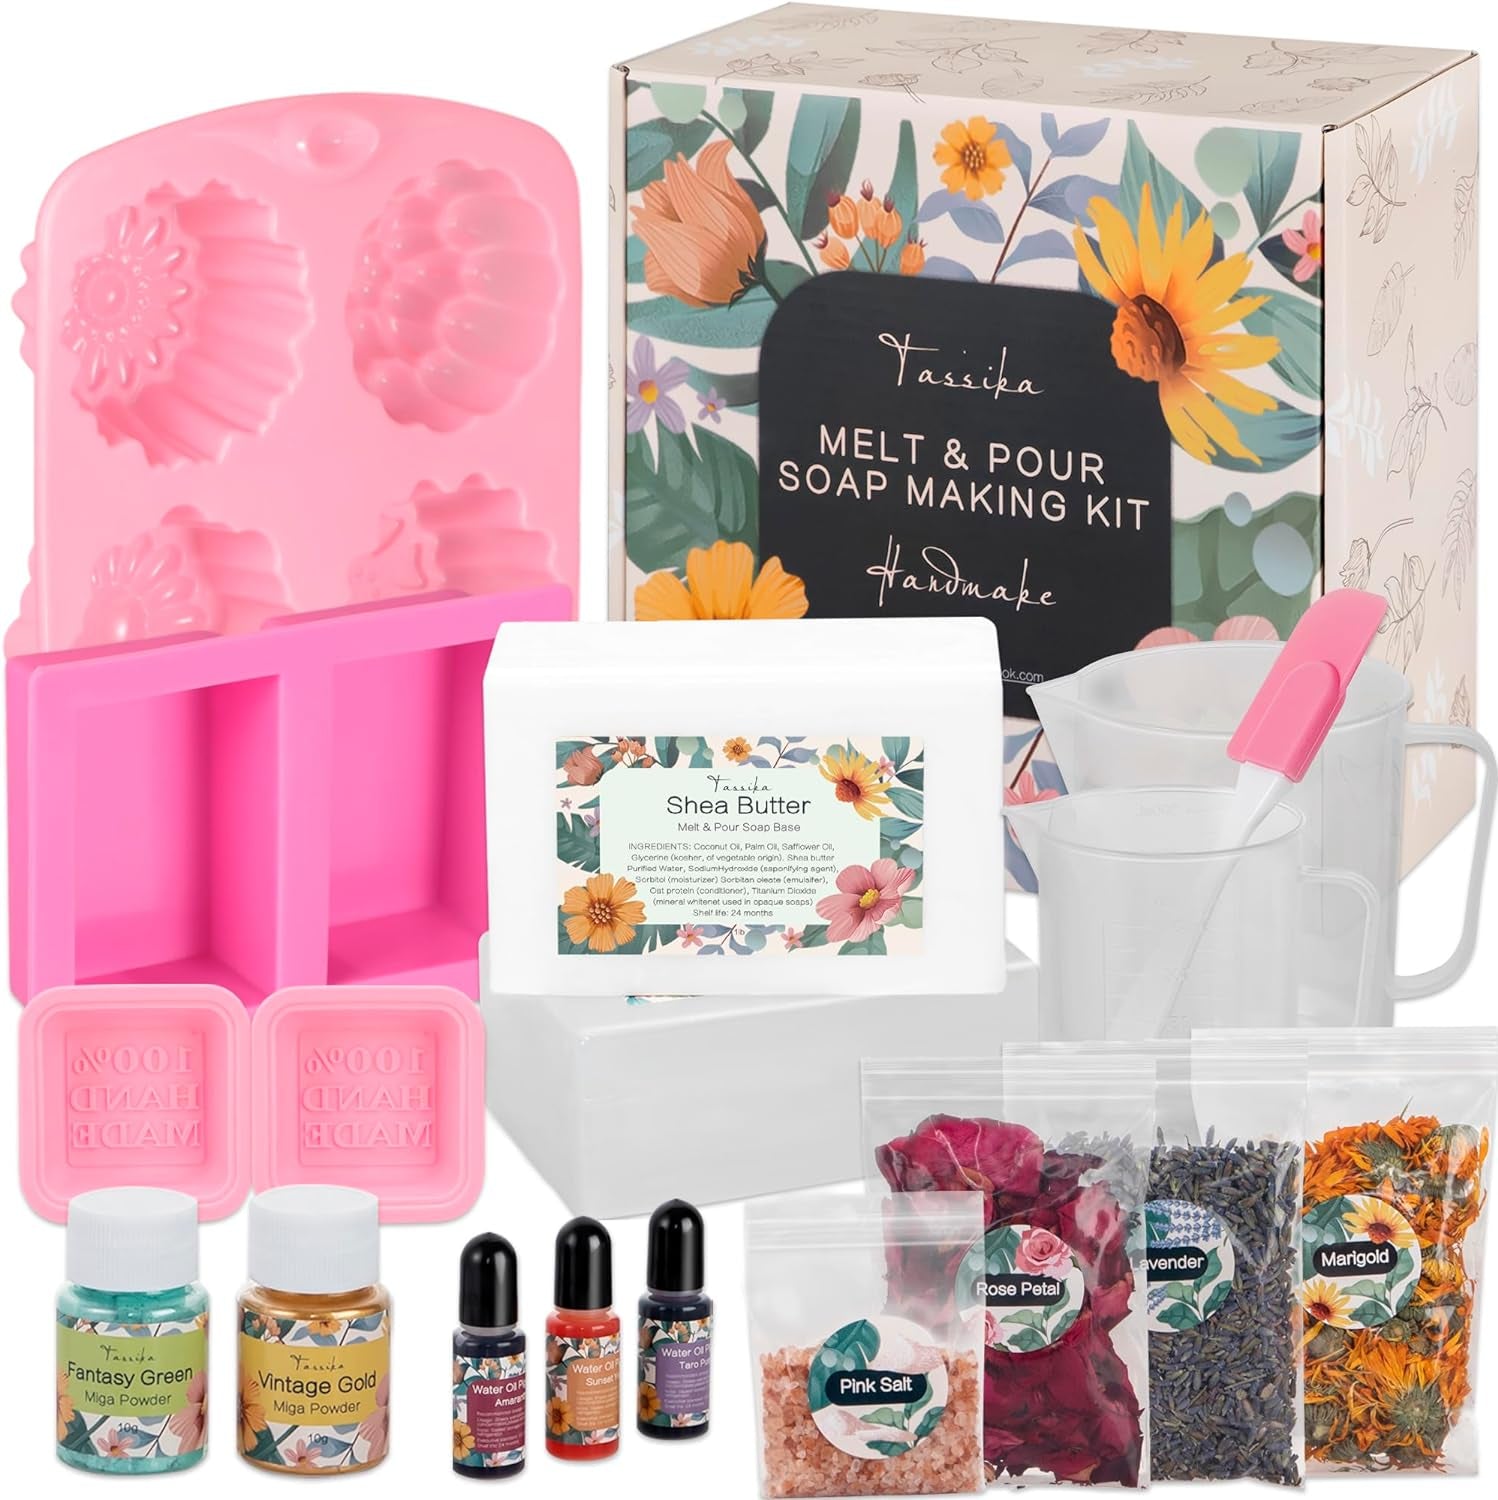 Handmade Soap Making Kit Supplies, DIY Melt & Pour Soap Making Kit for Adults: Includes 2Lbs Soap Base, Dried Flowers, Pigment, Silicon Mold, Measuring Cup, Personalized Handmade Soap Set Gift